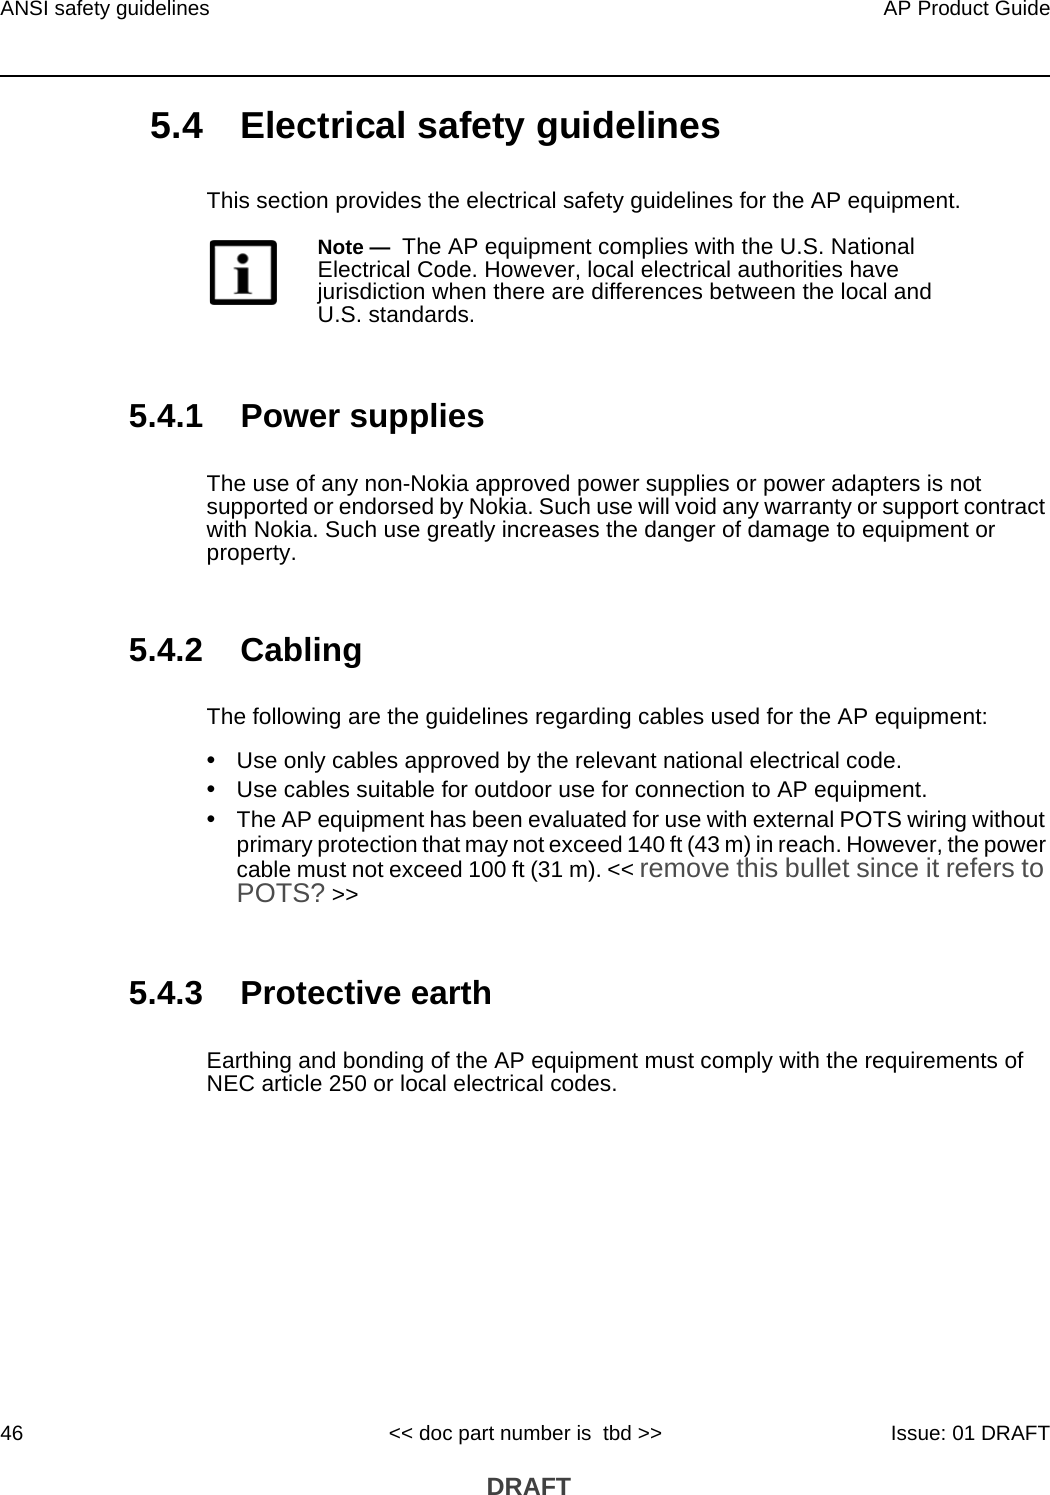 ANSI safety guidelines46AP Product Guide&lt;&lt; doc part number is  tbd &gt;&gt; Issue: 01 DRAFT DRAFT5.4 Electrical safety guidelinesThis section provides the electrical safety guidelines for the AP equipment.5.4.1 Power suppliesThe use of any non-Nokia approved power supplies or power adapters is not supported or endorsed by Nokia. Such use will void any warranty or support contract with Nokia. Such use greatly increases the danger of damage to equipment or property.5.4.2 CablingThe following are the guidelines regarding cables used for the AP equipment:•Use only cables approved by the relevant national electrical code.•Use cables suitable for outdoor use for connection to AP equipment.•The AP equipment has been evaluated for use with external POTS wiring without primary protection that may not exceed 140 ft (43 m) in reach. However, the power cable must not exceed 100 ft (31 m). &lt;&lt; remove this bullet since it refers to POTS? &gt;&gt;5.4.3 Protective earthEarthing and bonding of the AP equipment must comply with the requirements of NEC article 250 or local electrical codes.Note —  The AP equipment complies with the U.S. National Electrical Code. However, local electrical authorities have jurisdiction when there are differences between the local and U.S. standards.